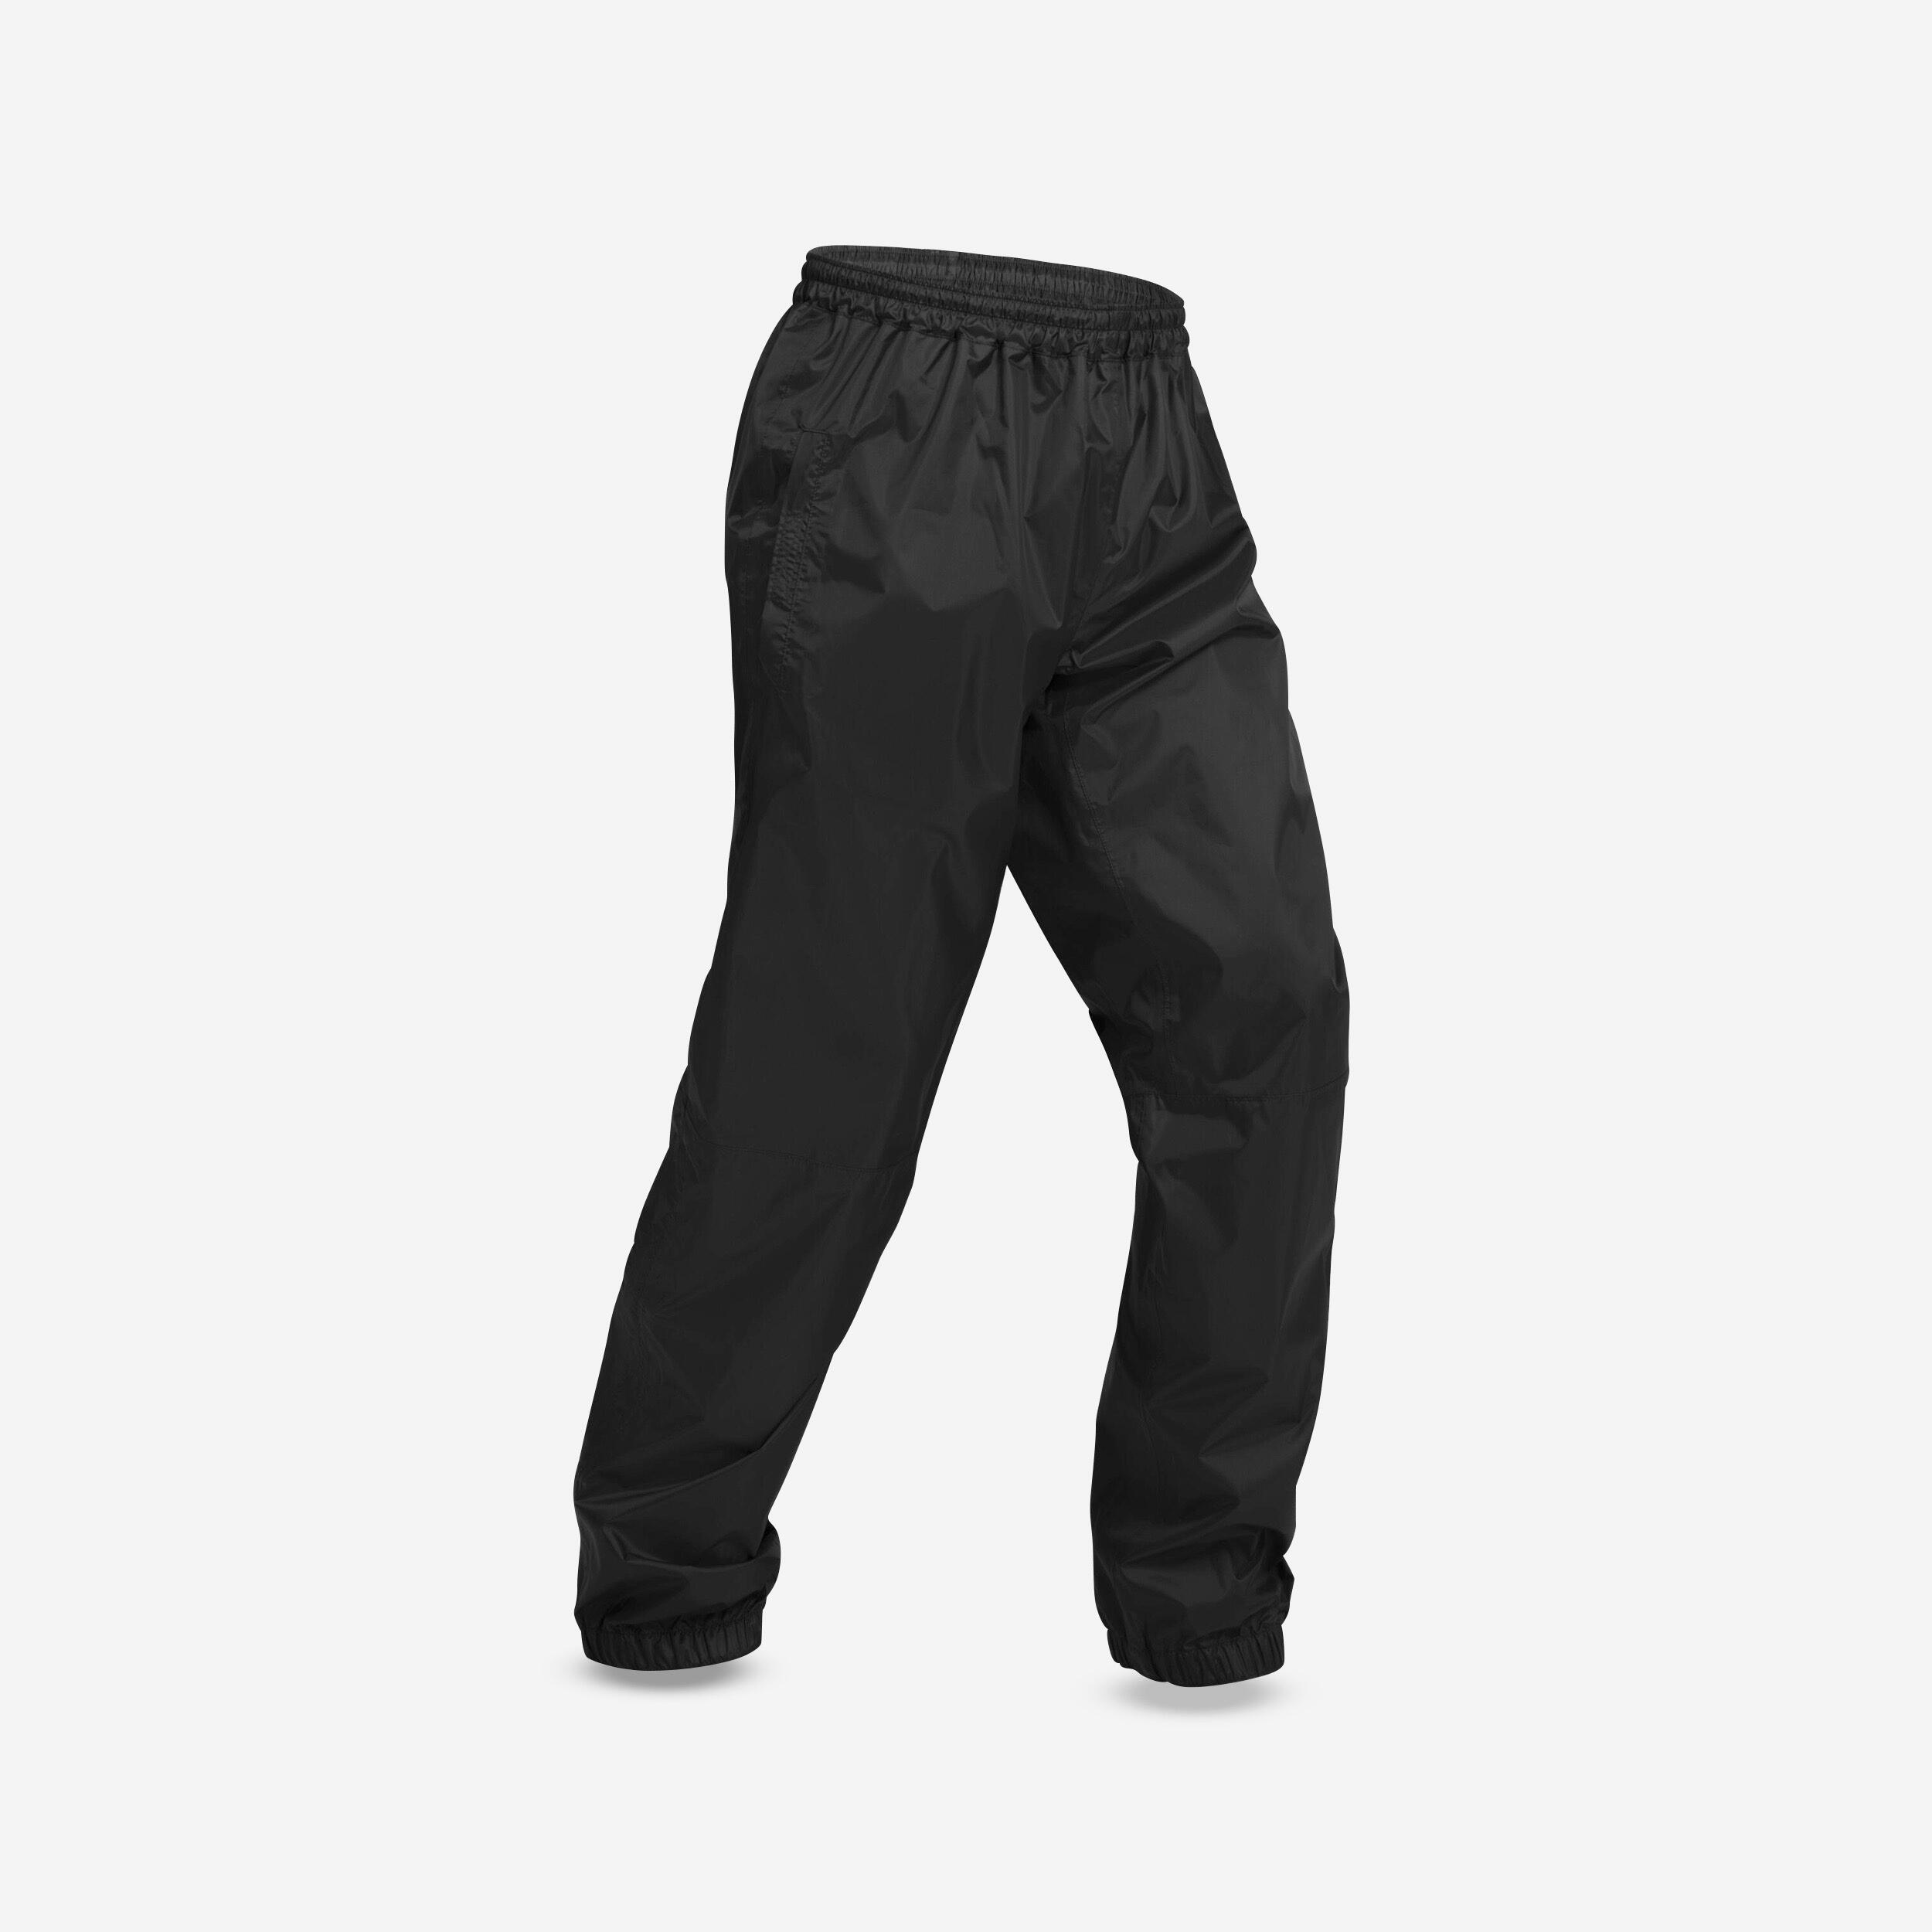 Men's Waterproof Hiking Over Trousers - NH500 Imper 1/3